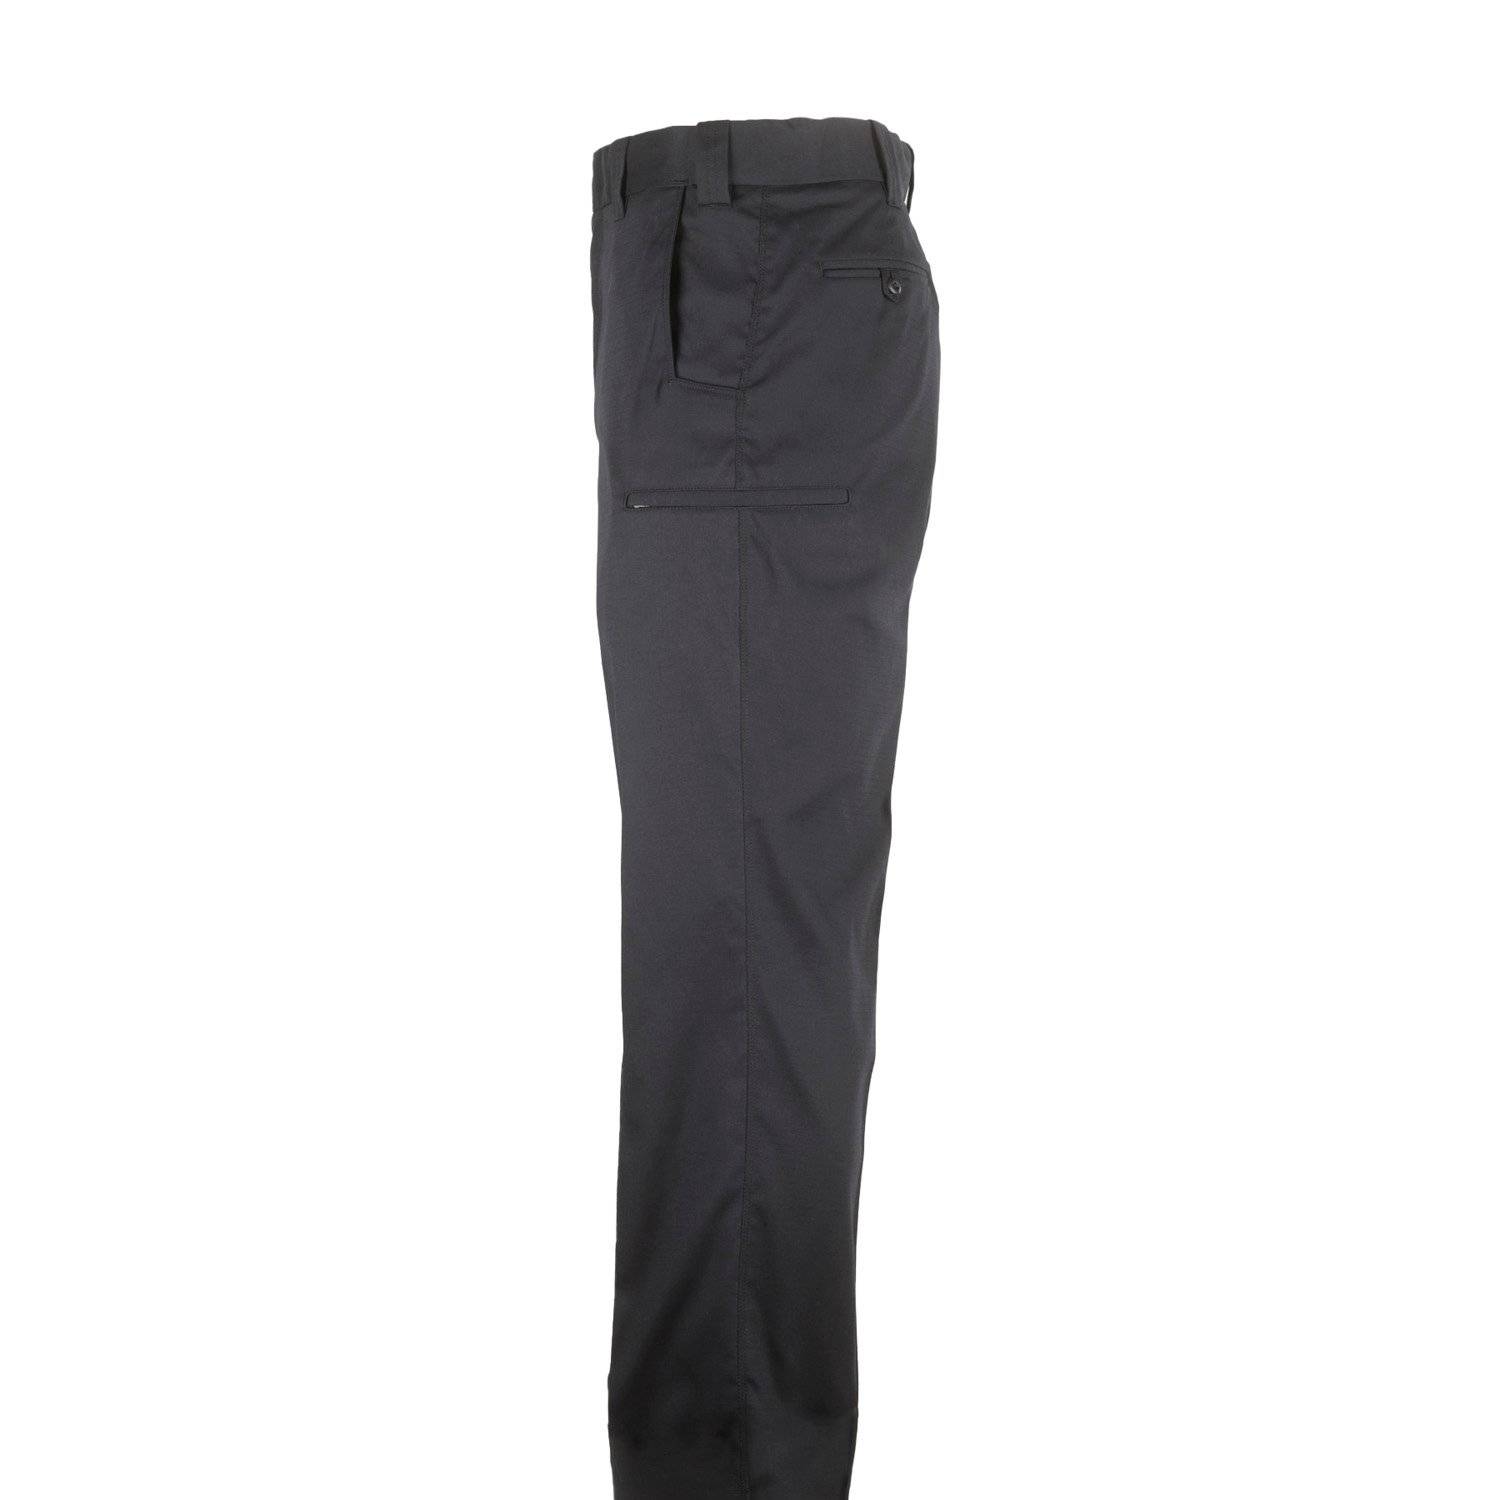 Flying Cross FX S.T.A.T. Class A 6 Pocket Trousers